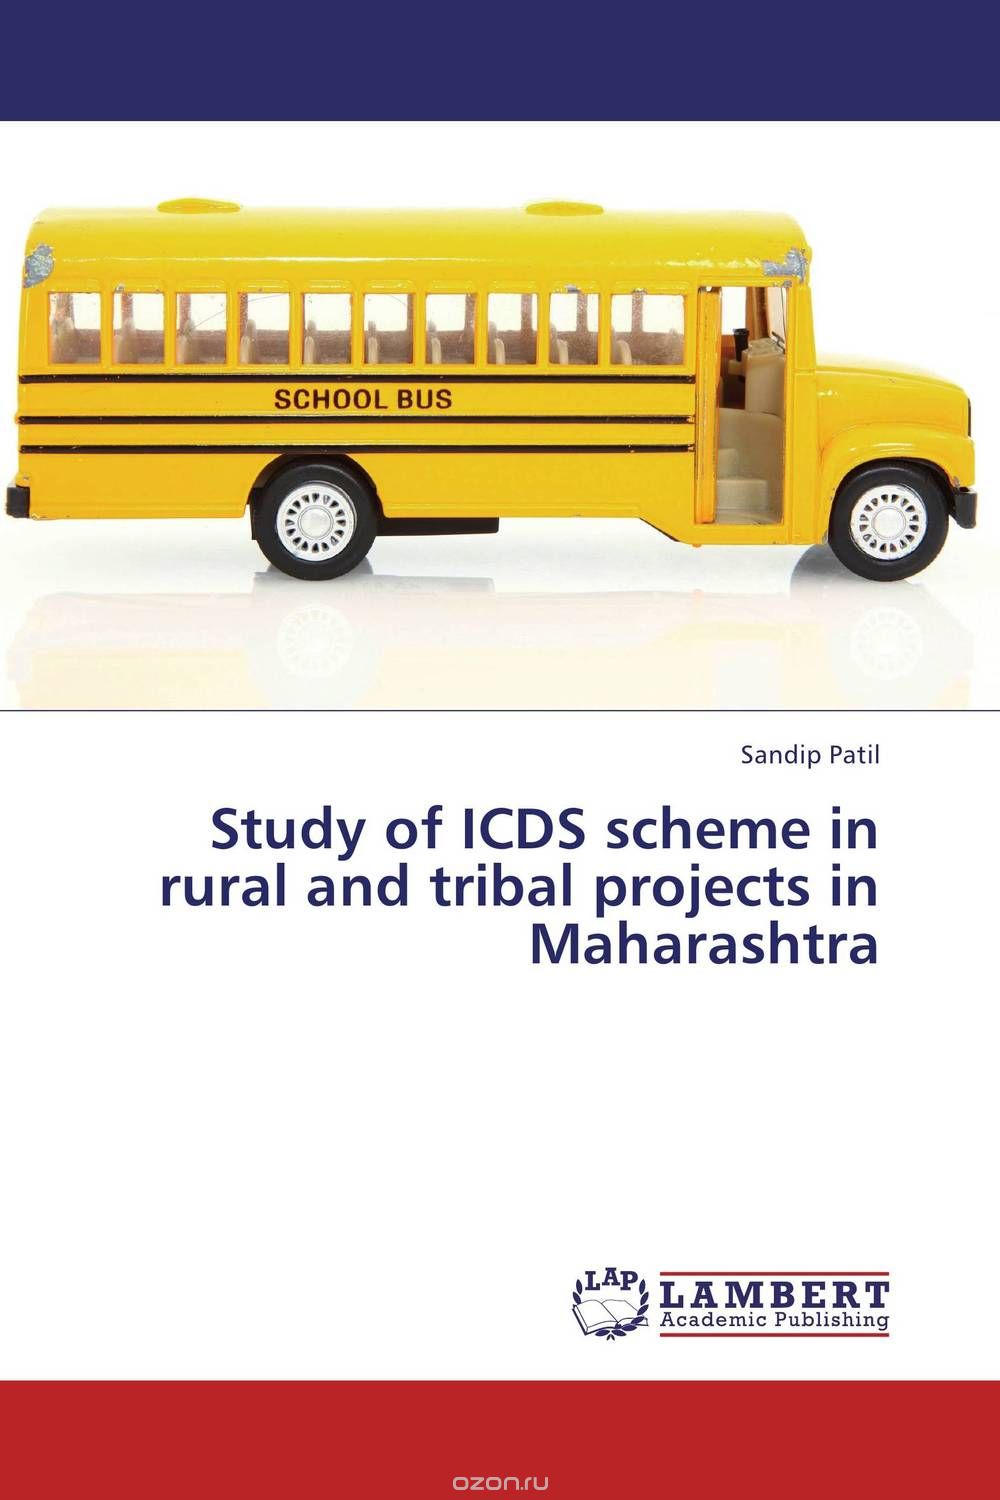 Скачать книгу "Study of ICDS scheme in rural and tribal projects in Maharashtra"